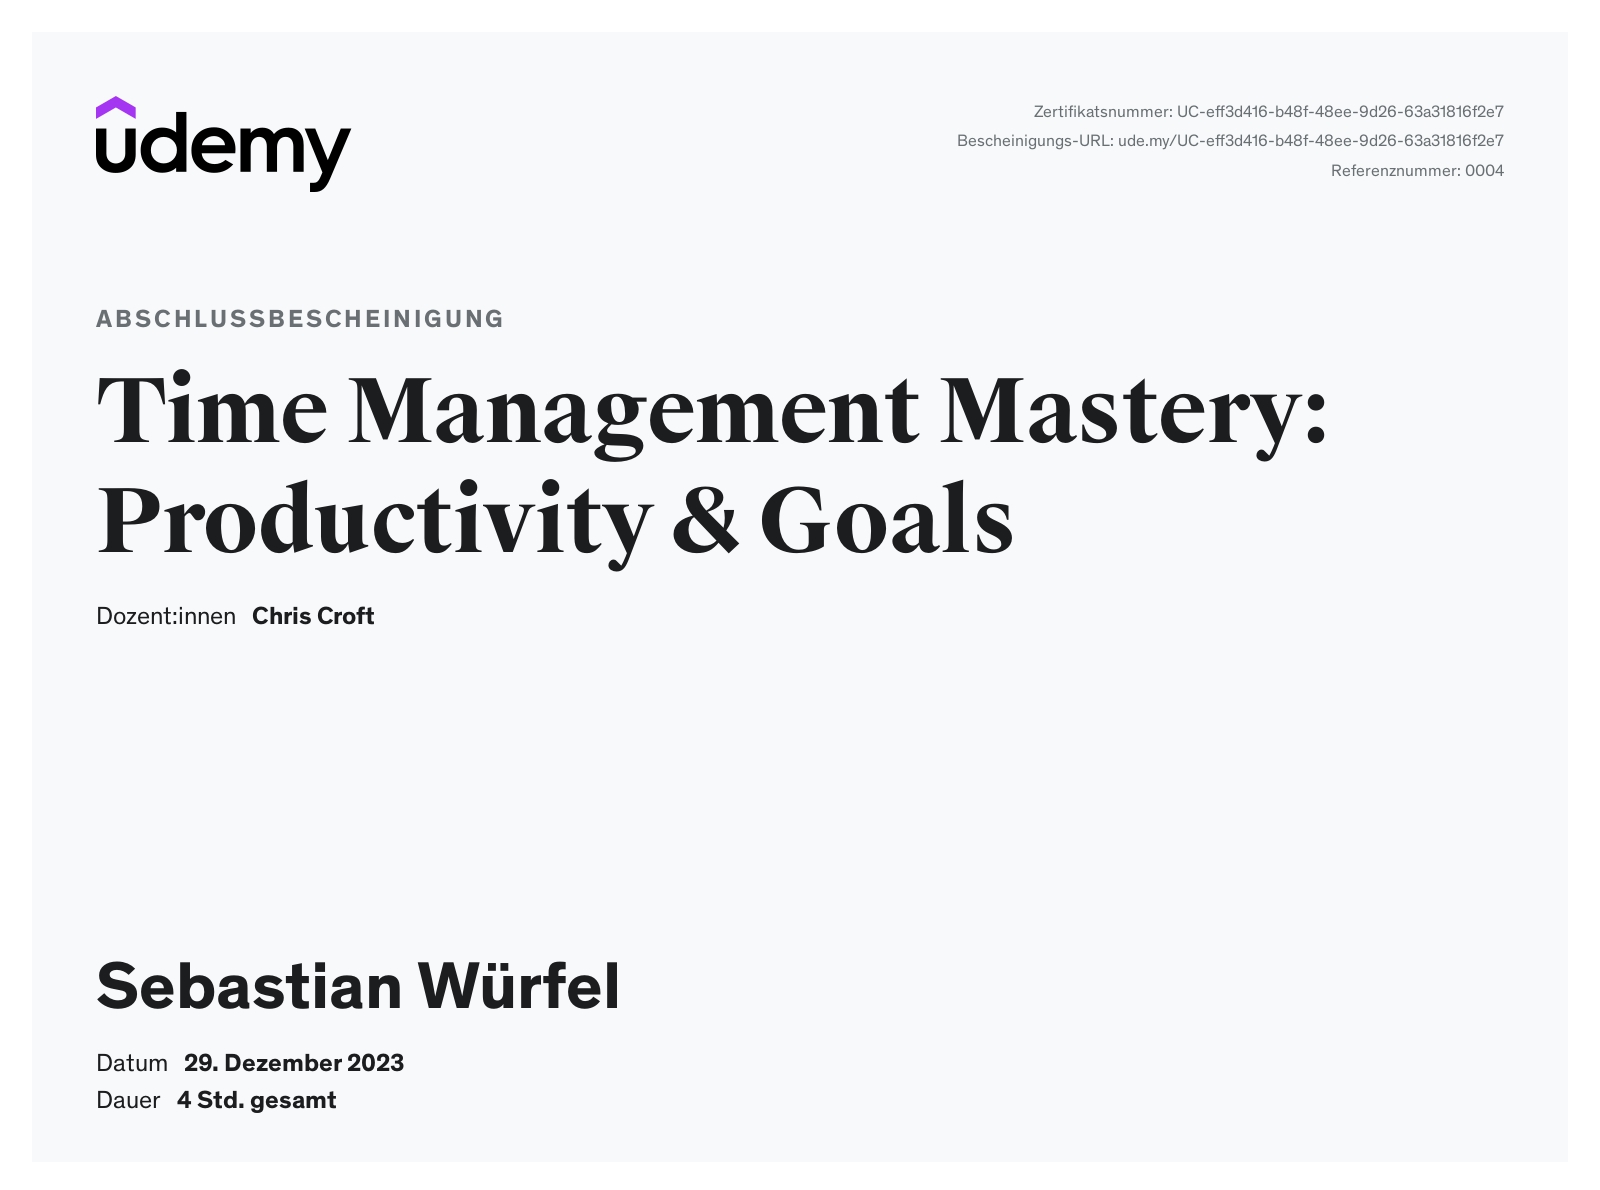 Time Management Mastery: Productivity & Goals